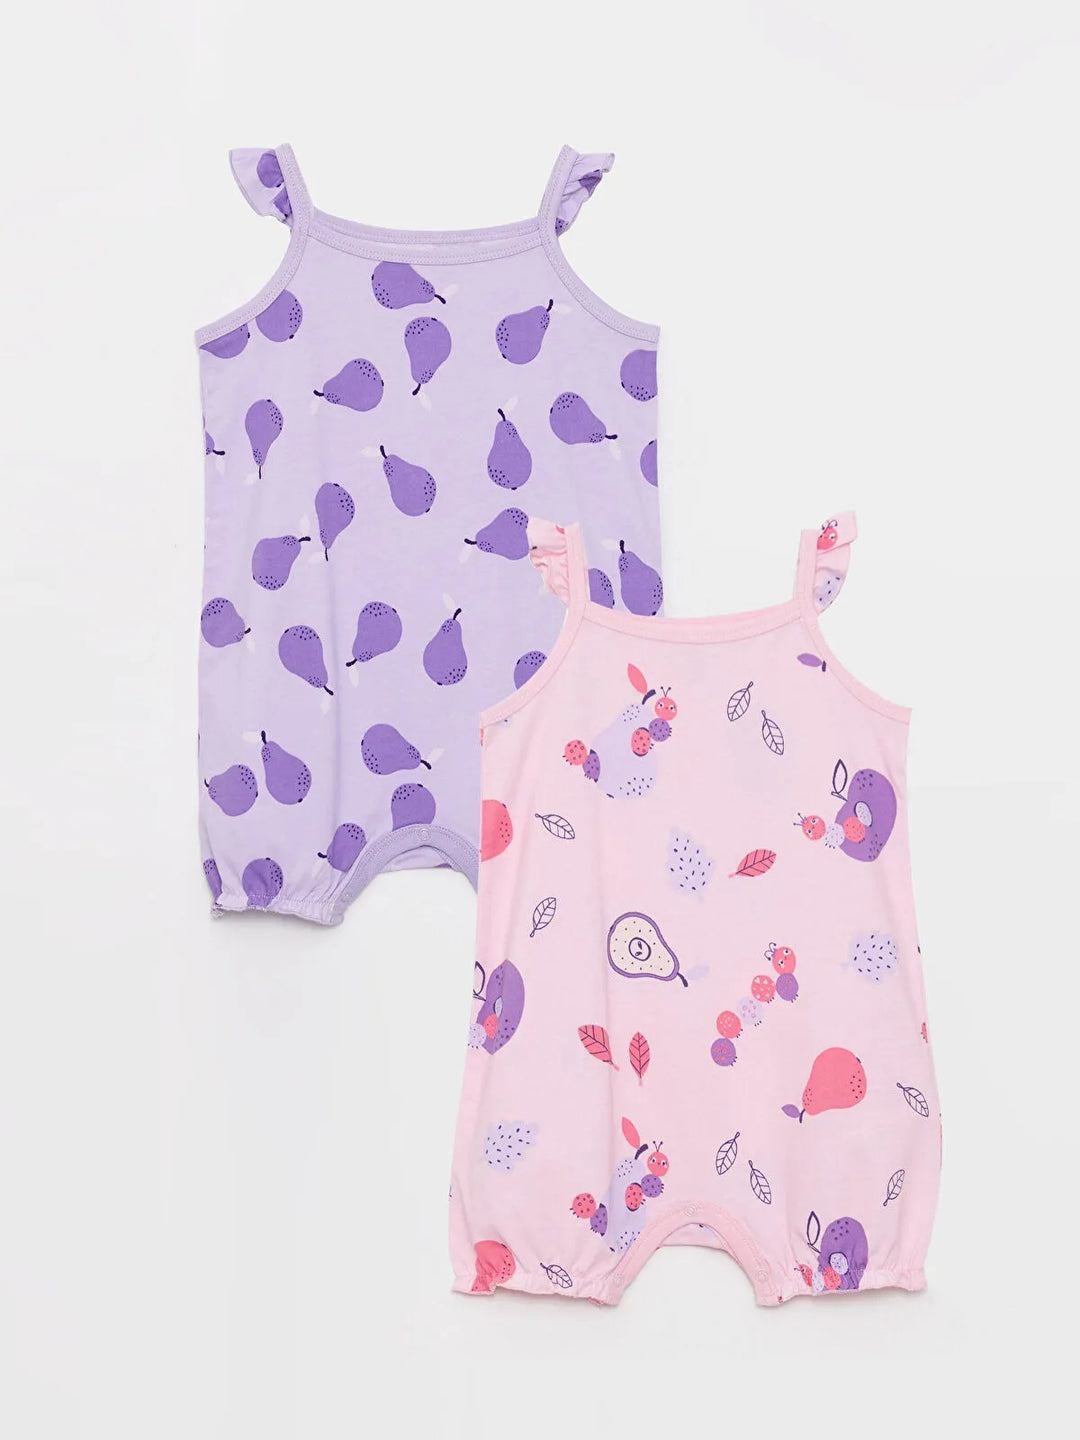 Square Collar Strap Printed Cotton Baby Girl Rompers 2 Pack